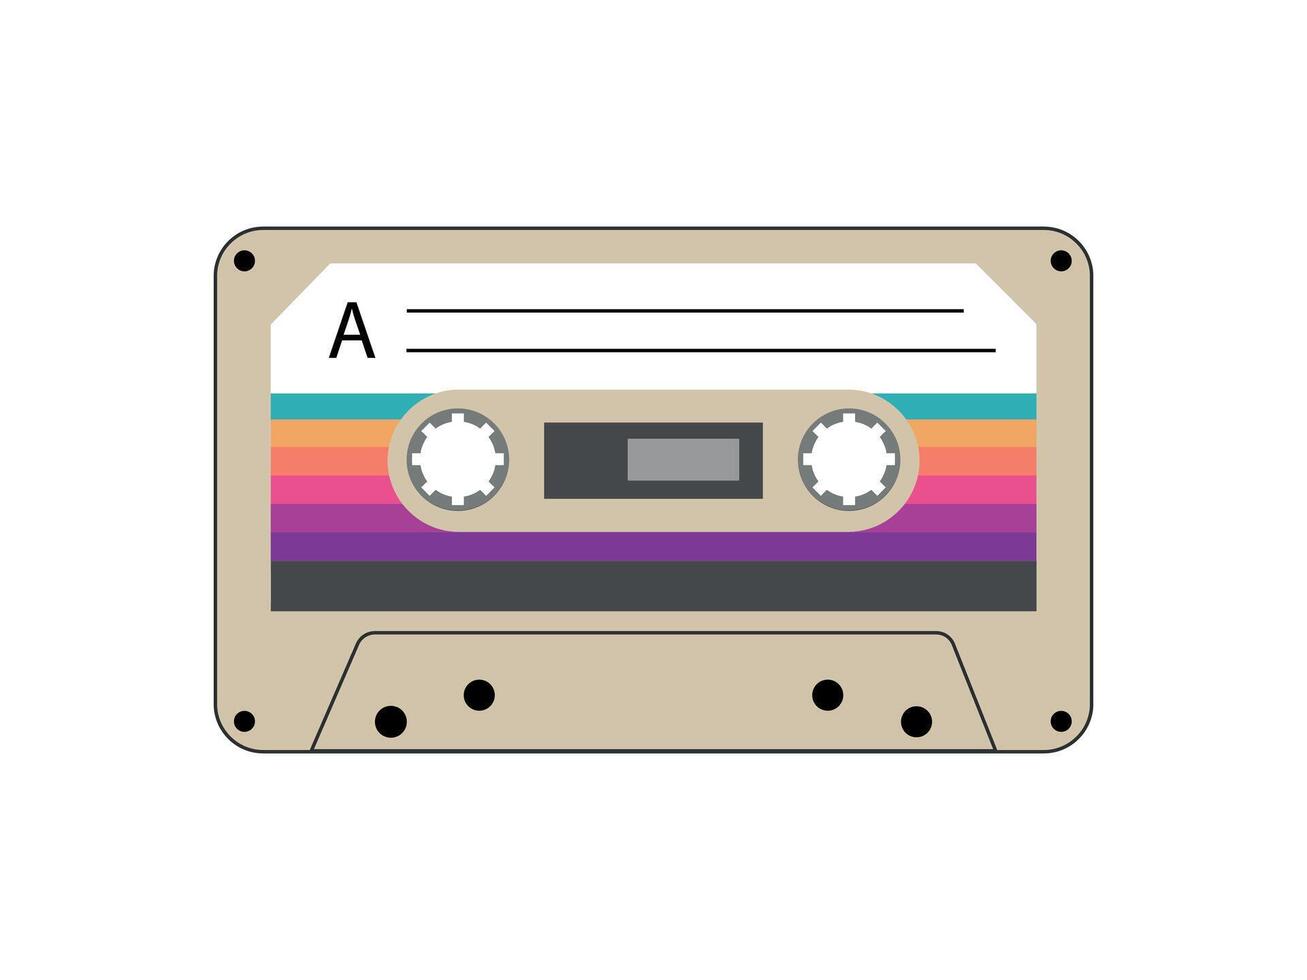 Plastic old cassette in flat style on a white background. Retro cassette of the 90s. Vintage cassette tape vector